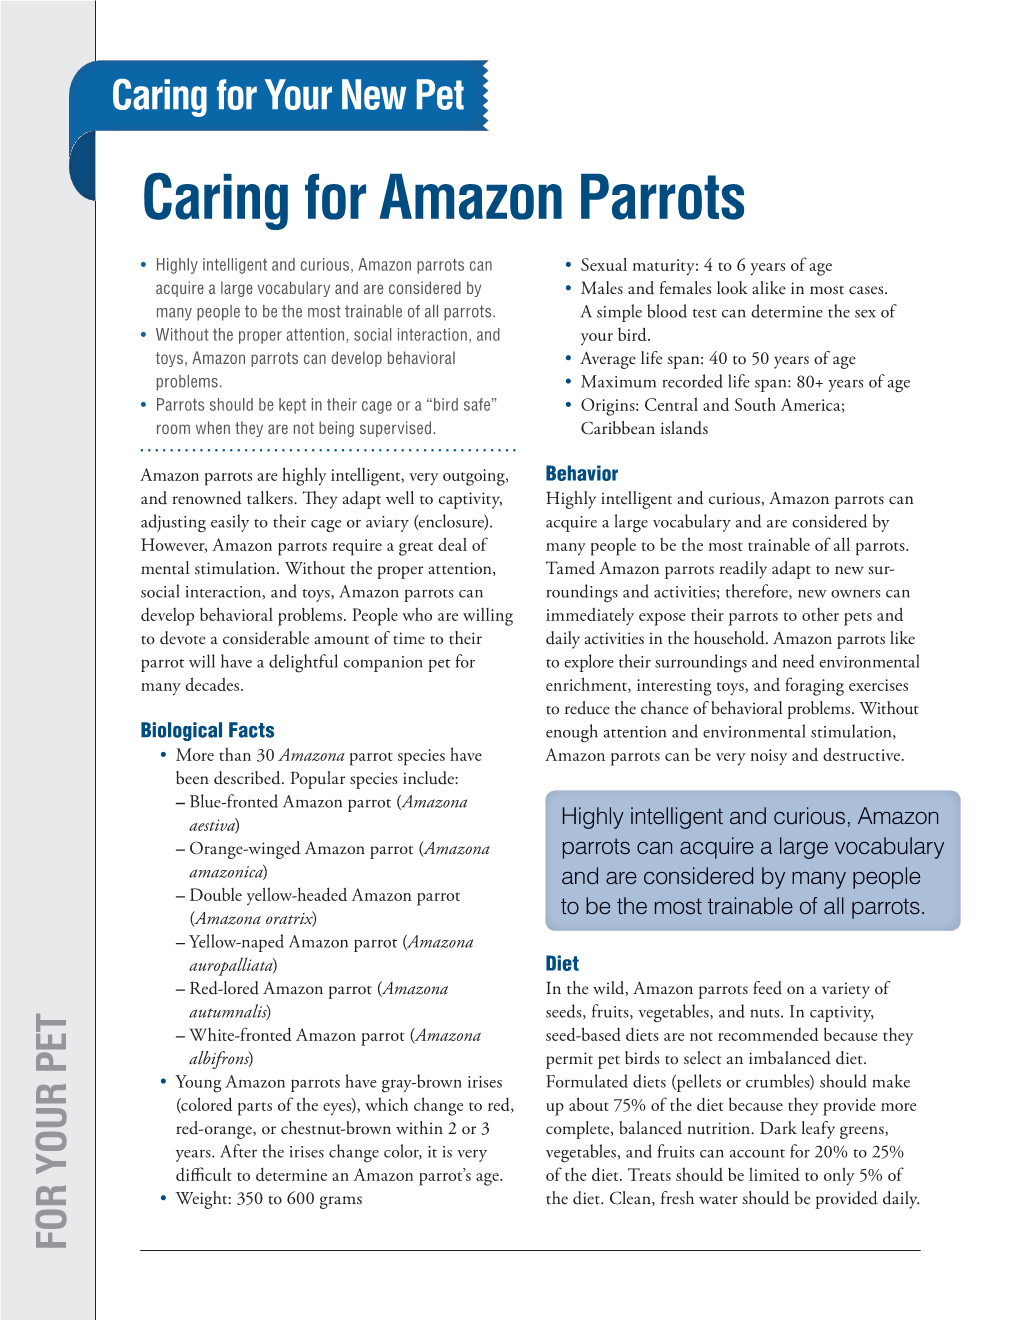 Caring for Amazon Parrots